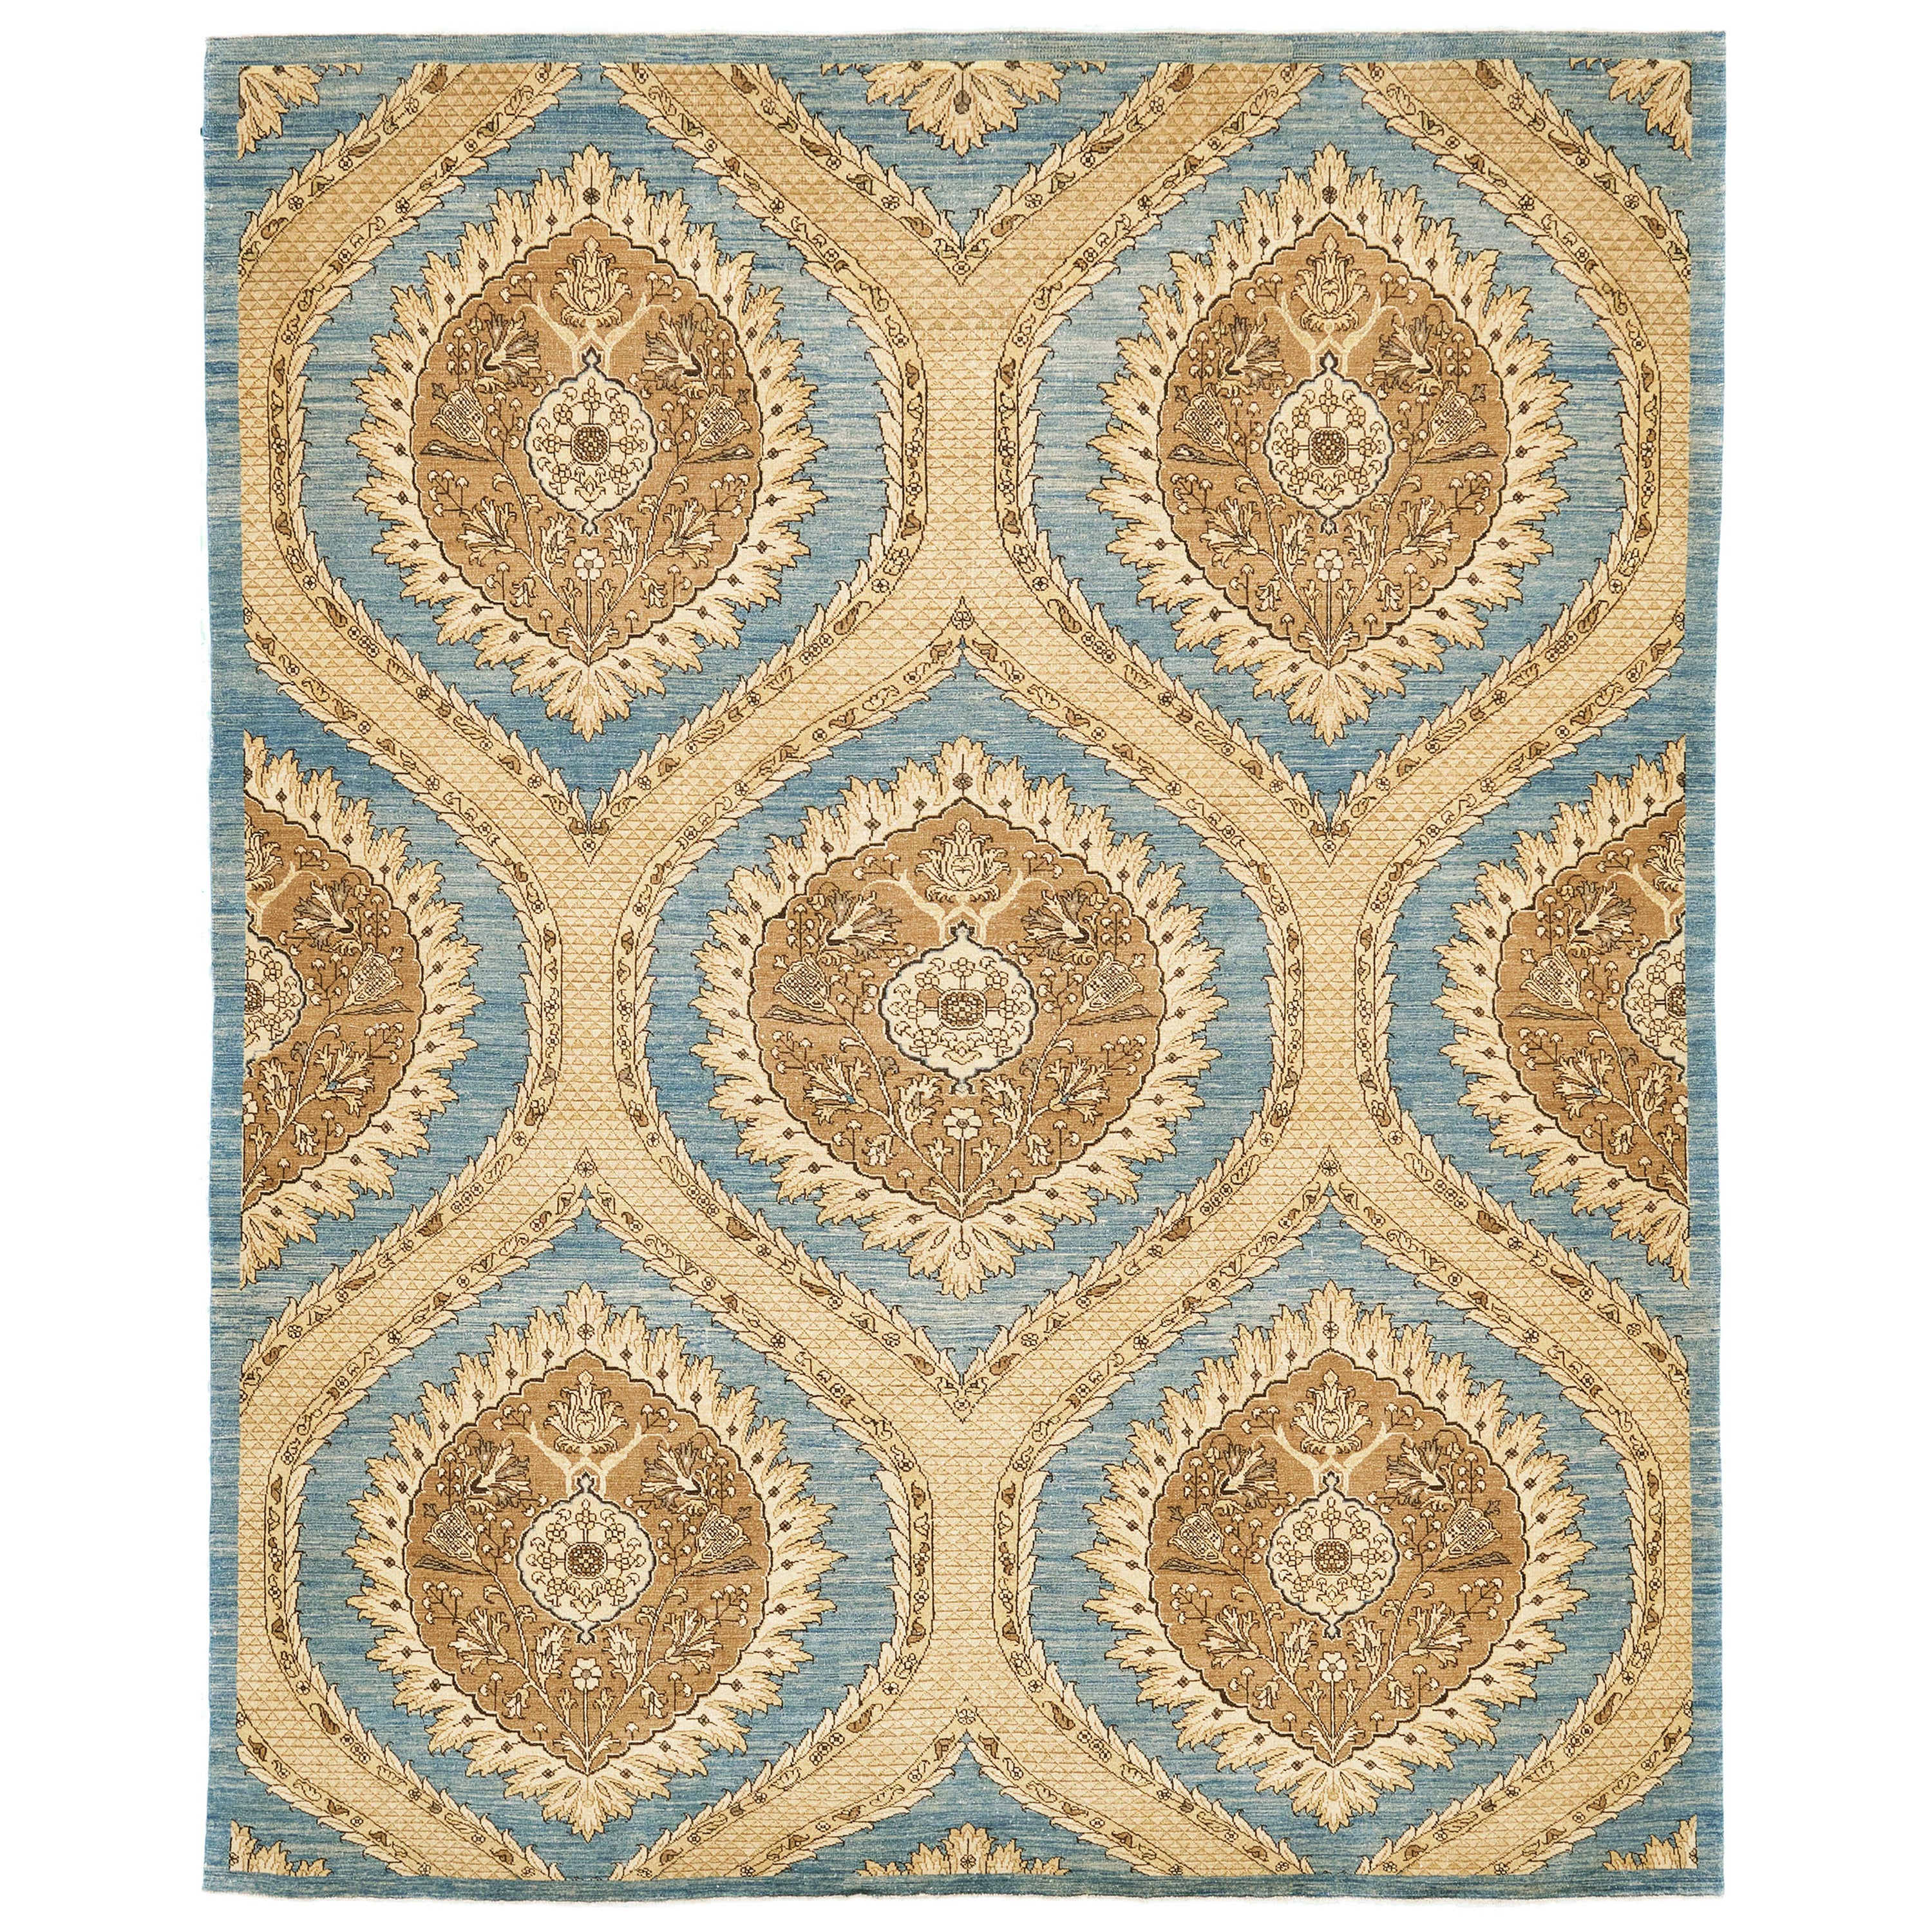 Natural Dye Transitional Style Arts and Crafts Rug D5207 Bliss For Sale